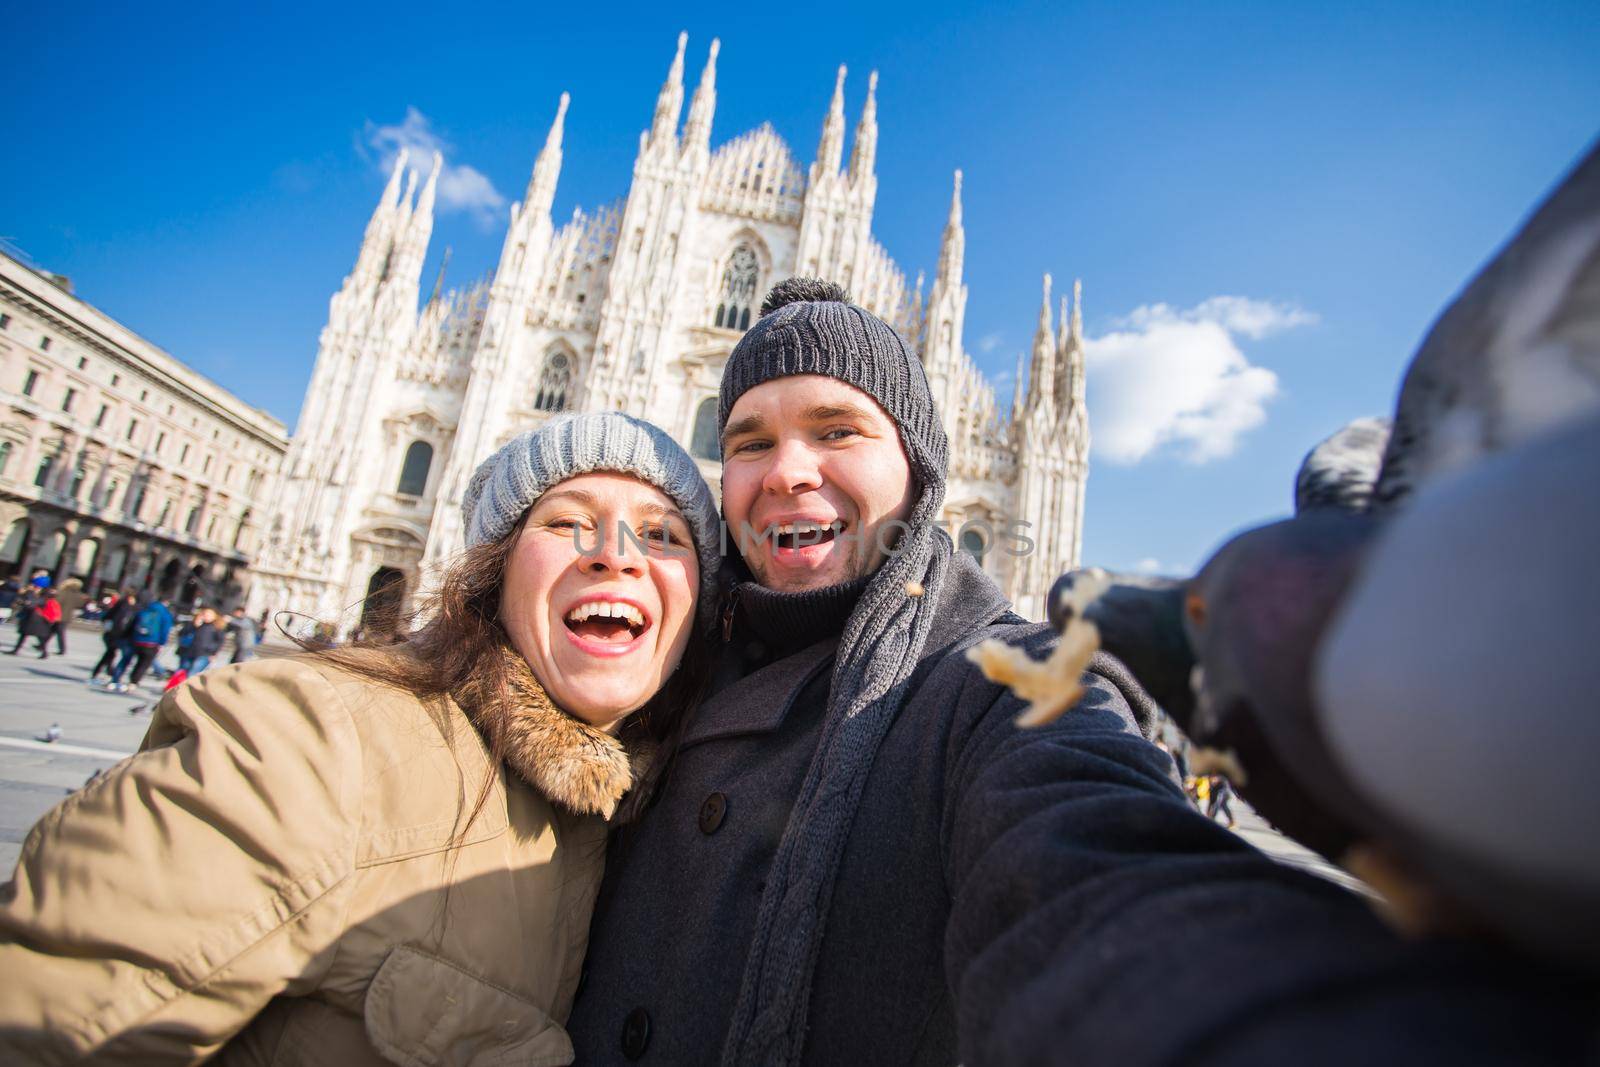 Winter travel and vacations concept - Happy tourists taking a self portrait with funny pigeons in front of Duomo cathedral in Milan.